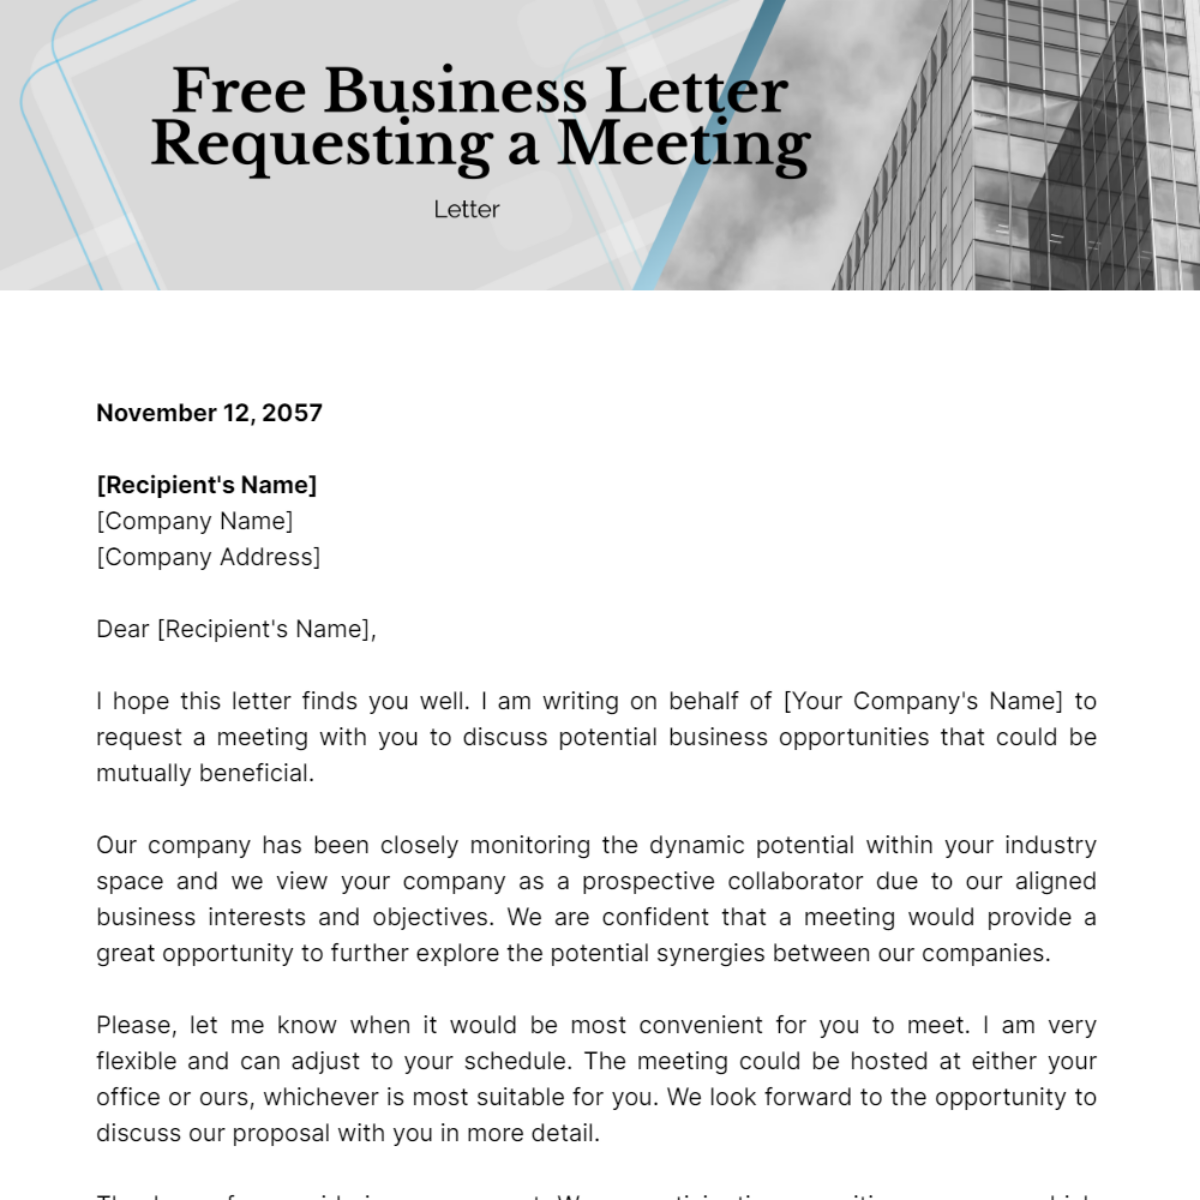 Business Letter Requesting a Meeting Template